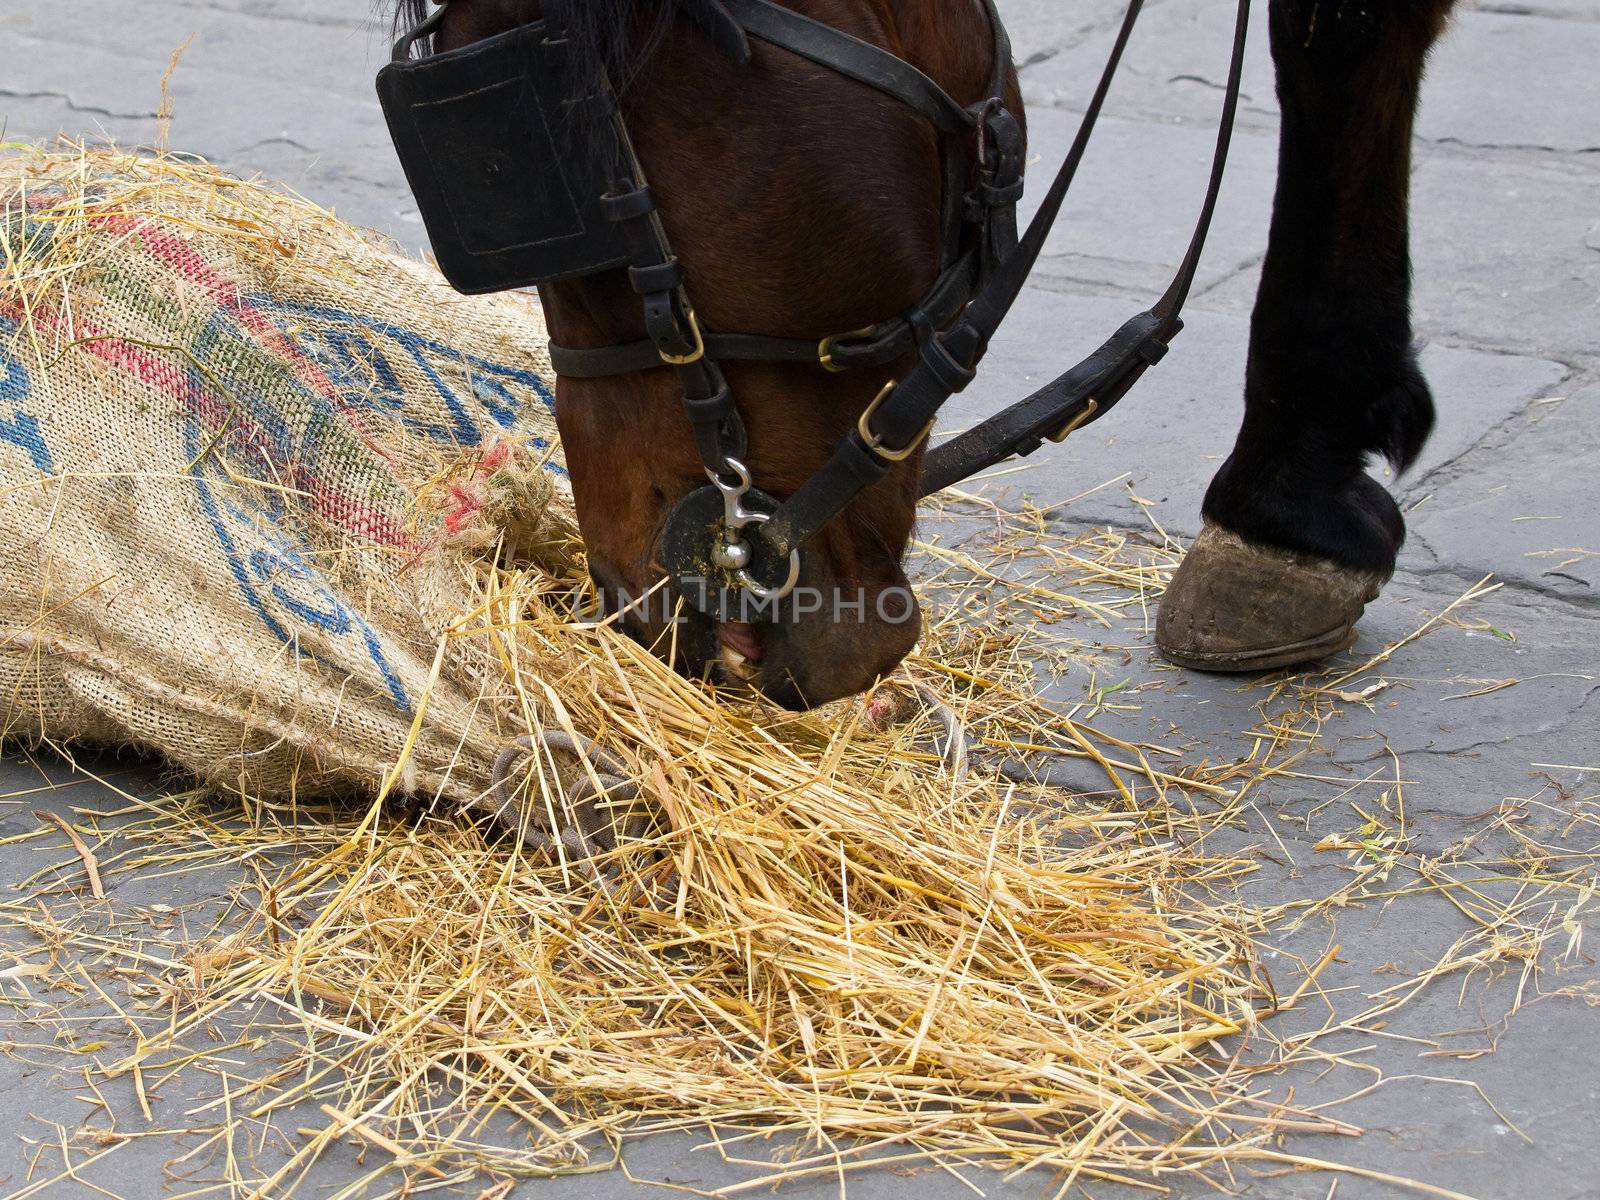 horse eating pasture from the bag on the street